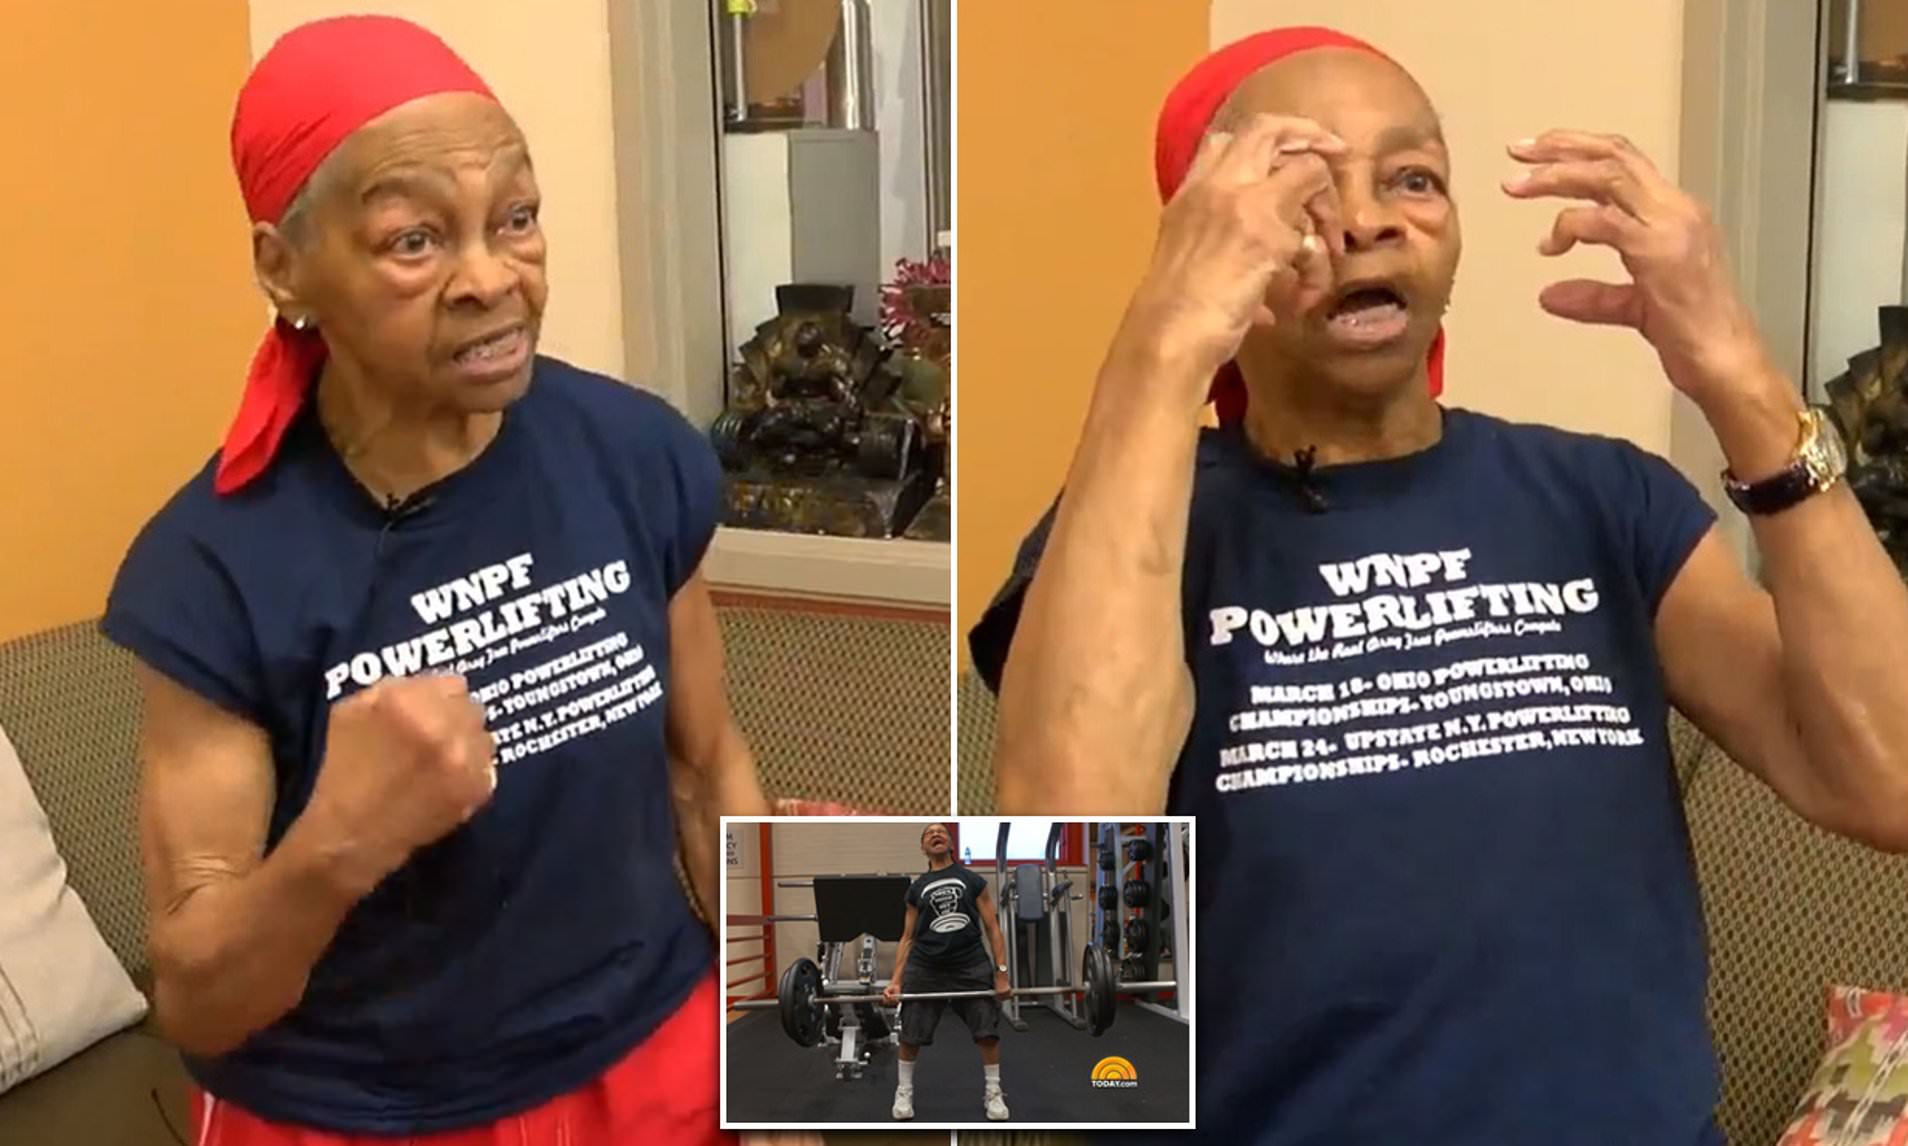 82-year-old powerlifting sheila savagely beats the s**t out of home intruder